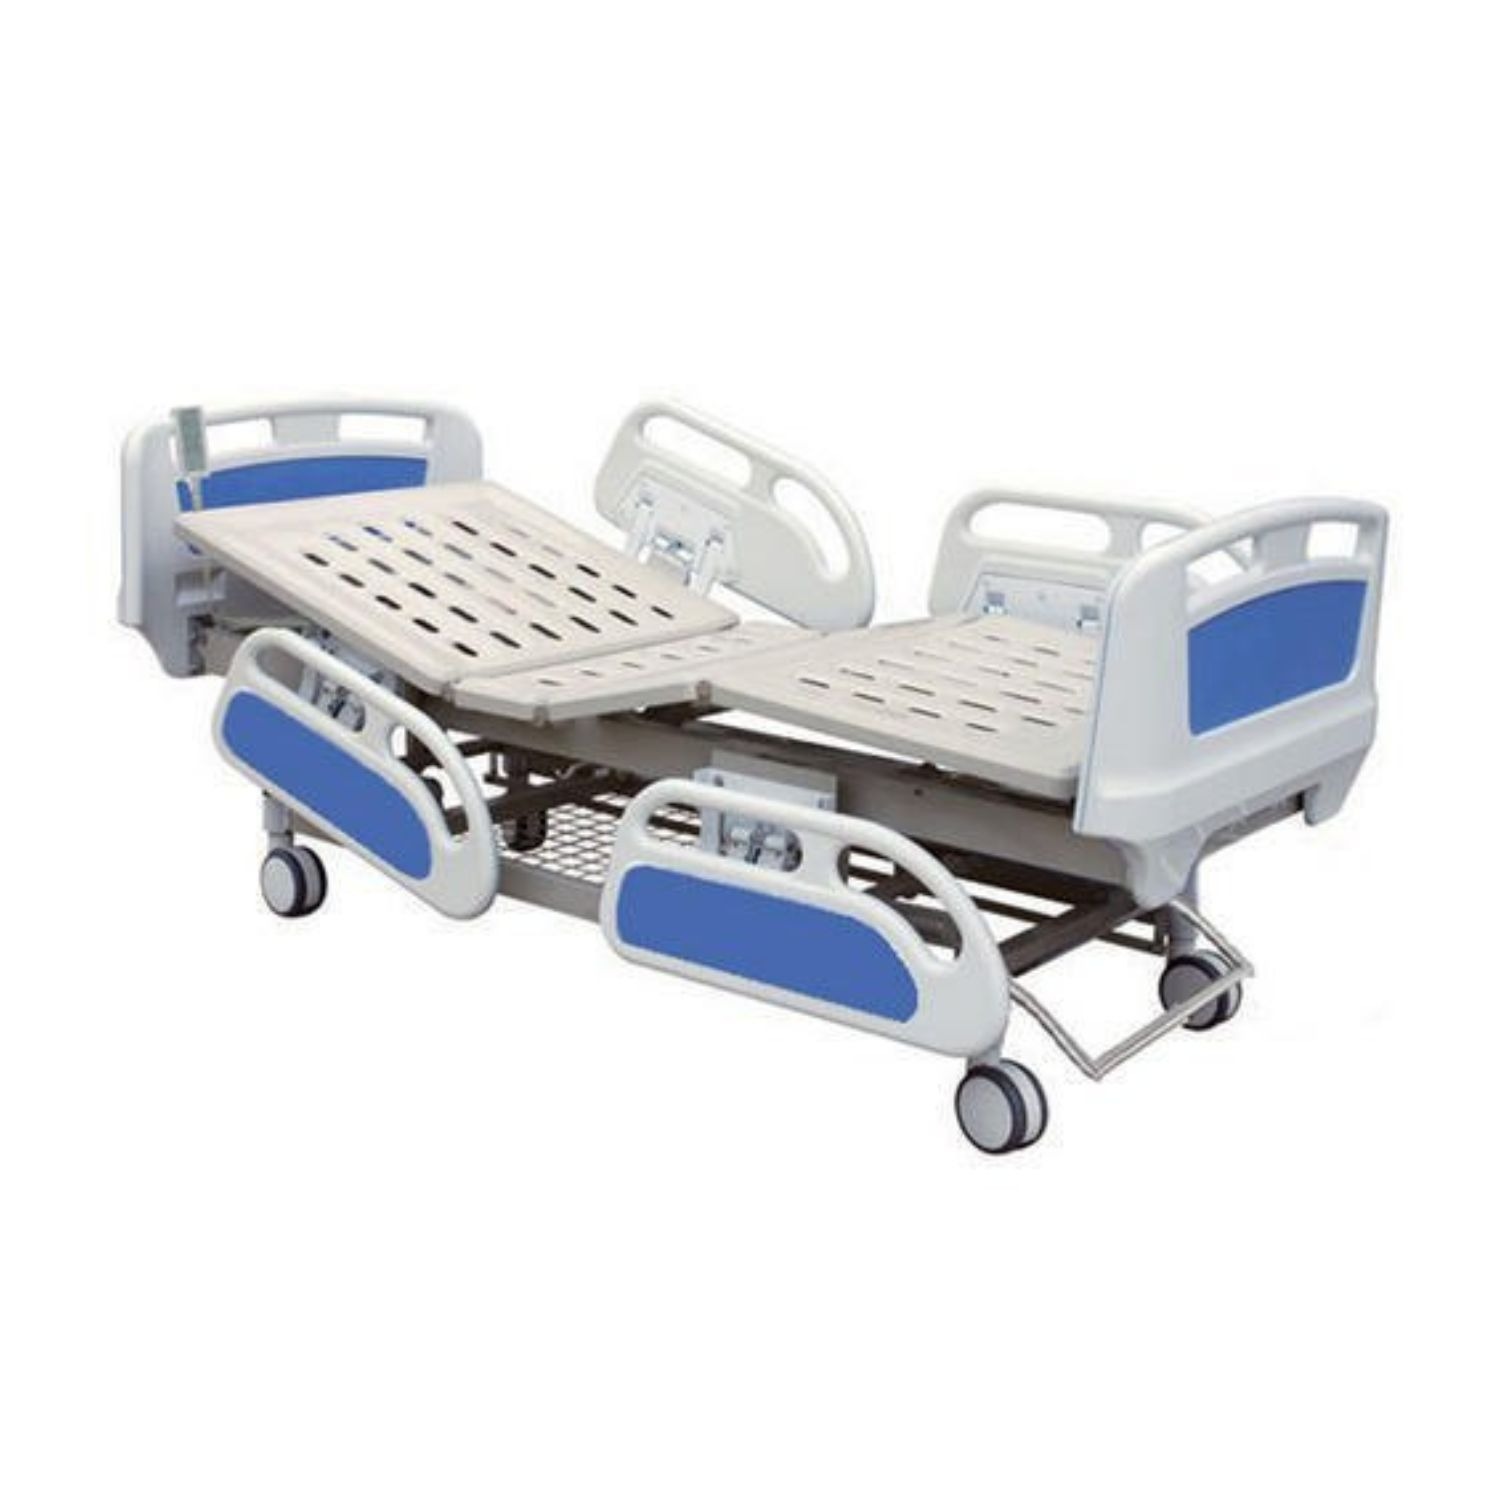 MPS Medical Equipments - Five Function Automatic Hospital Bed renting solutions at your home care